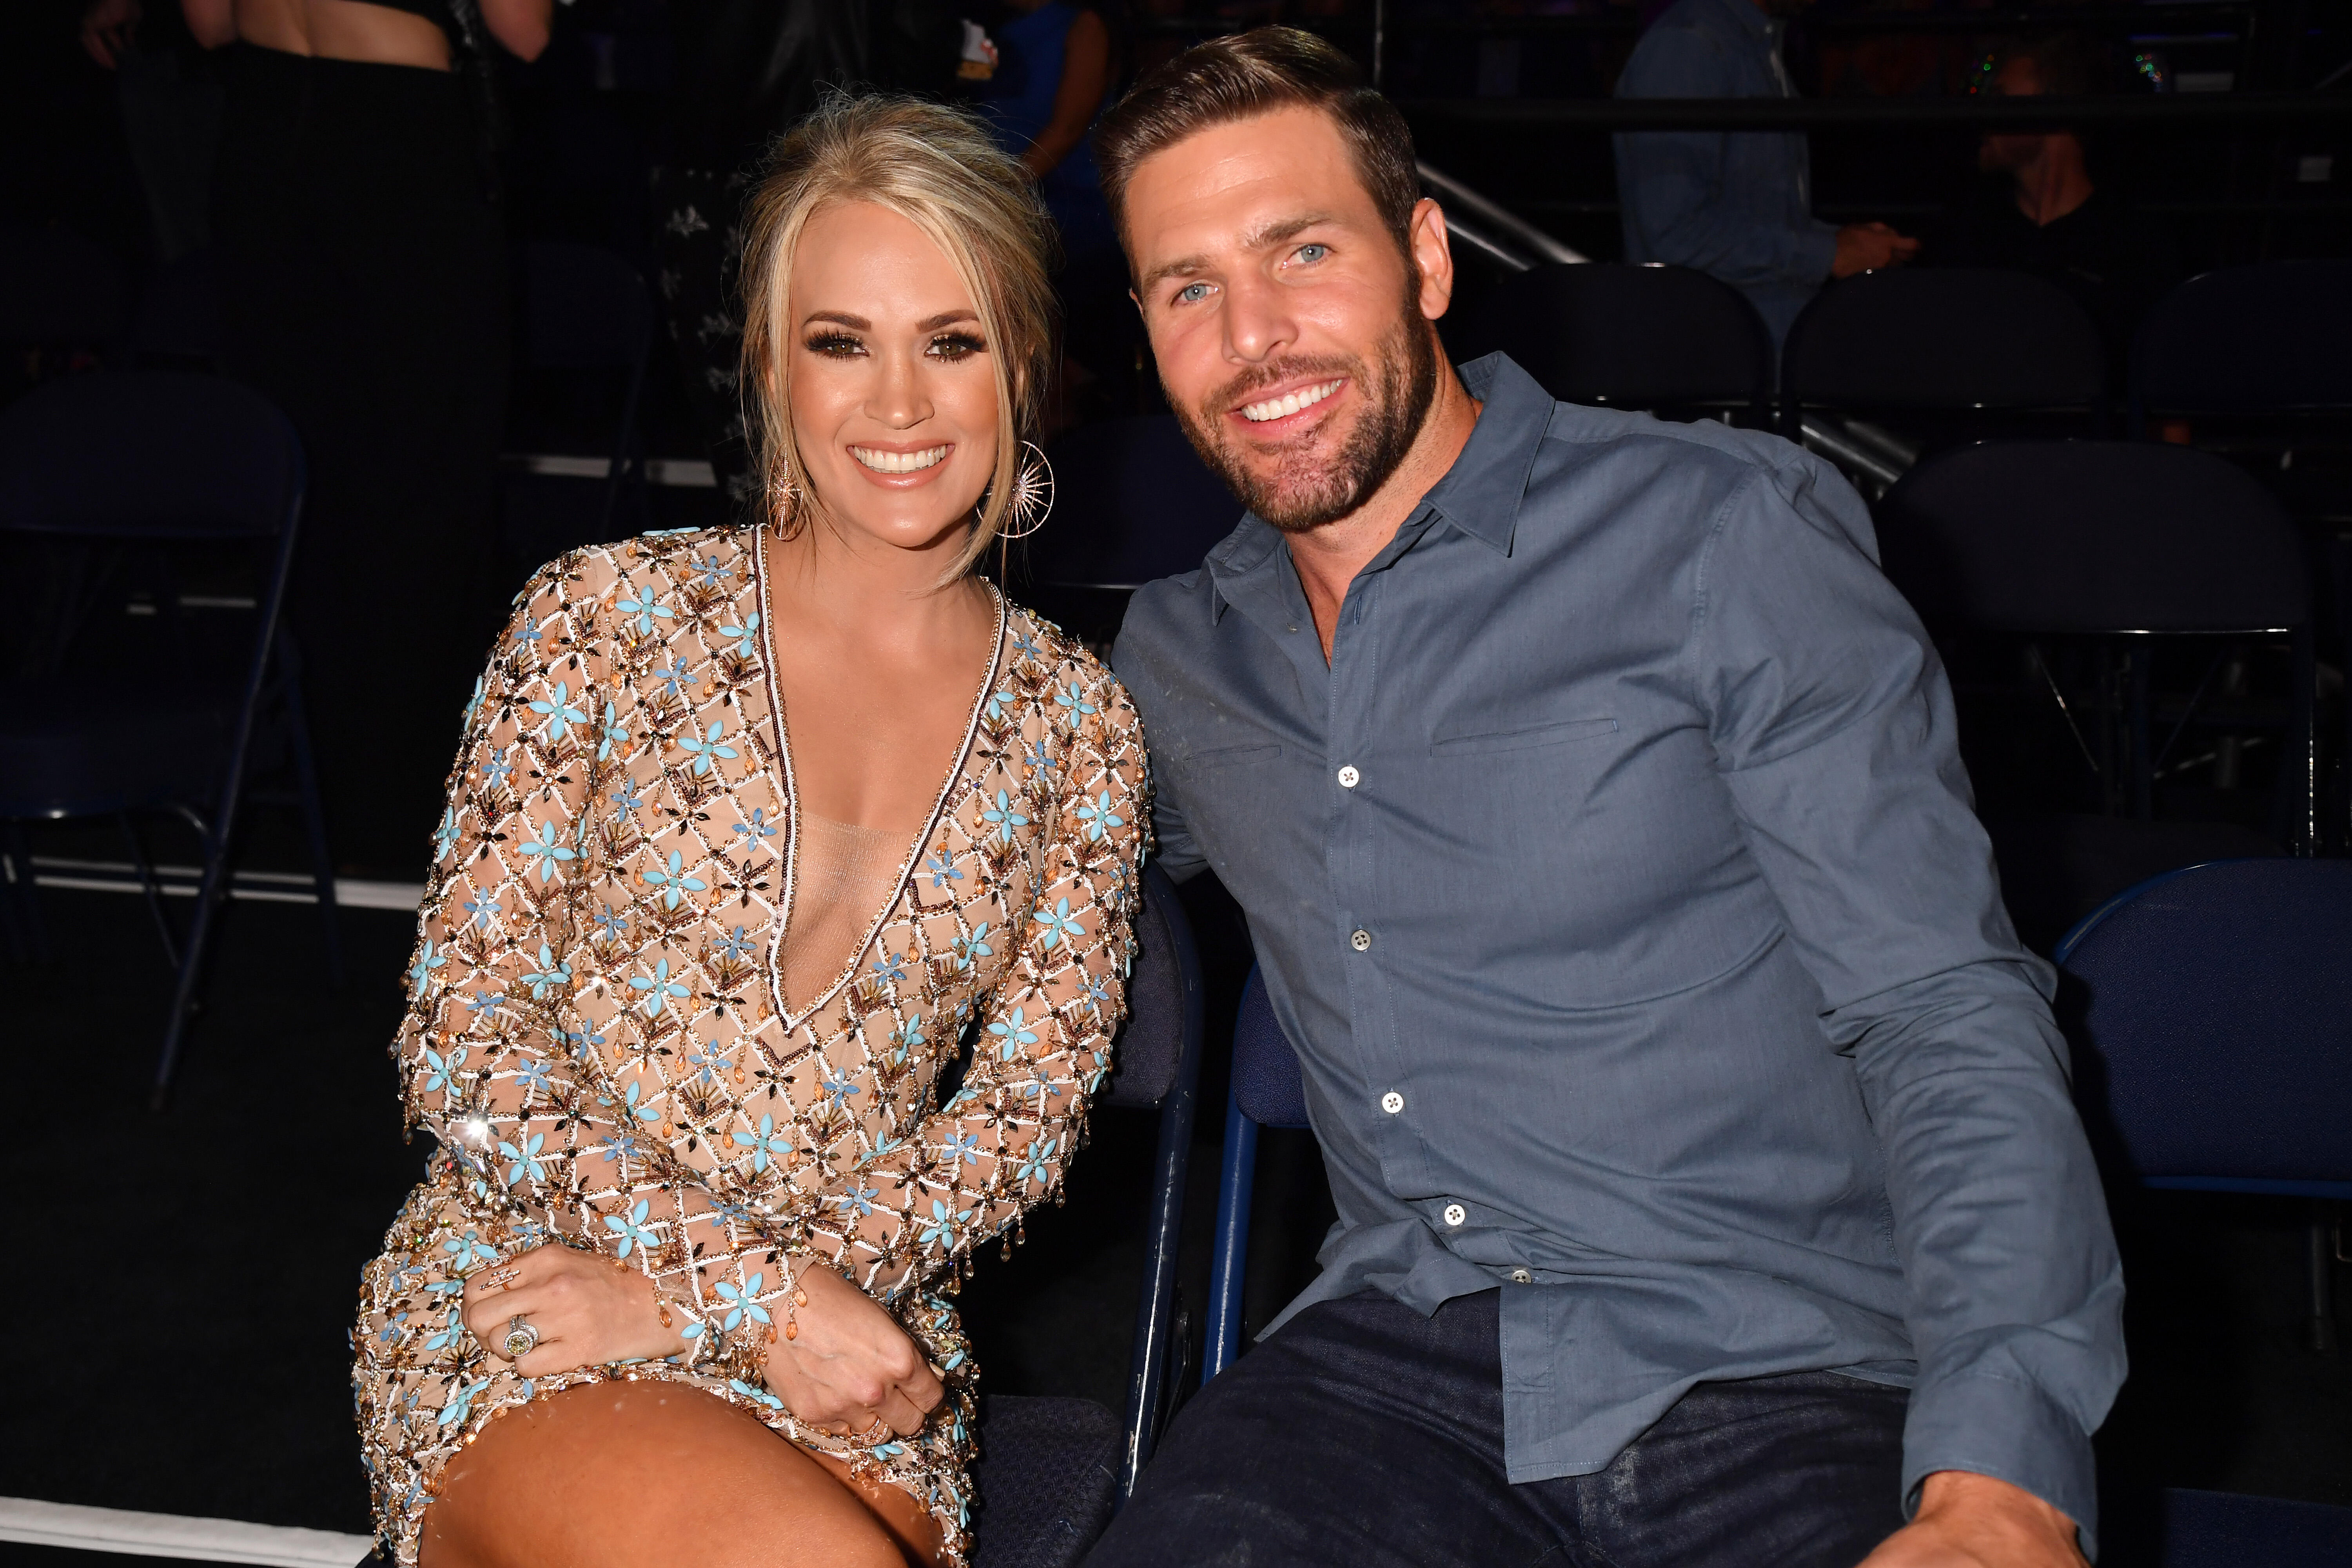 Carrie Underwood & Mike Fisher Celebrate 11th Anniversary With Swee...